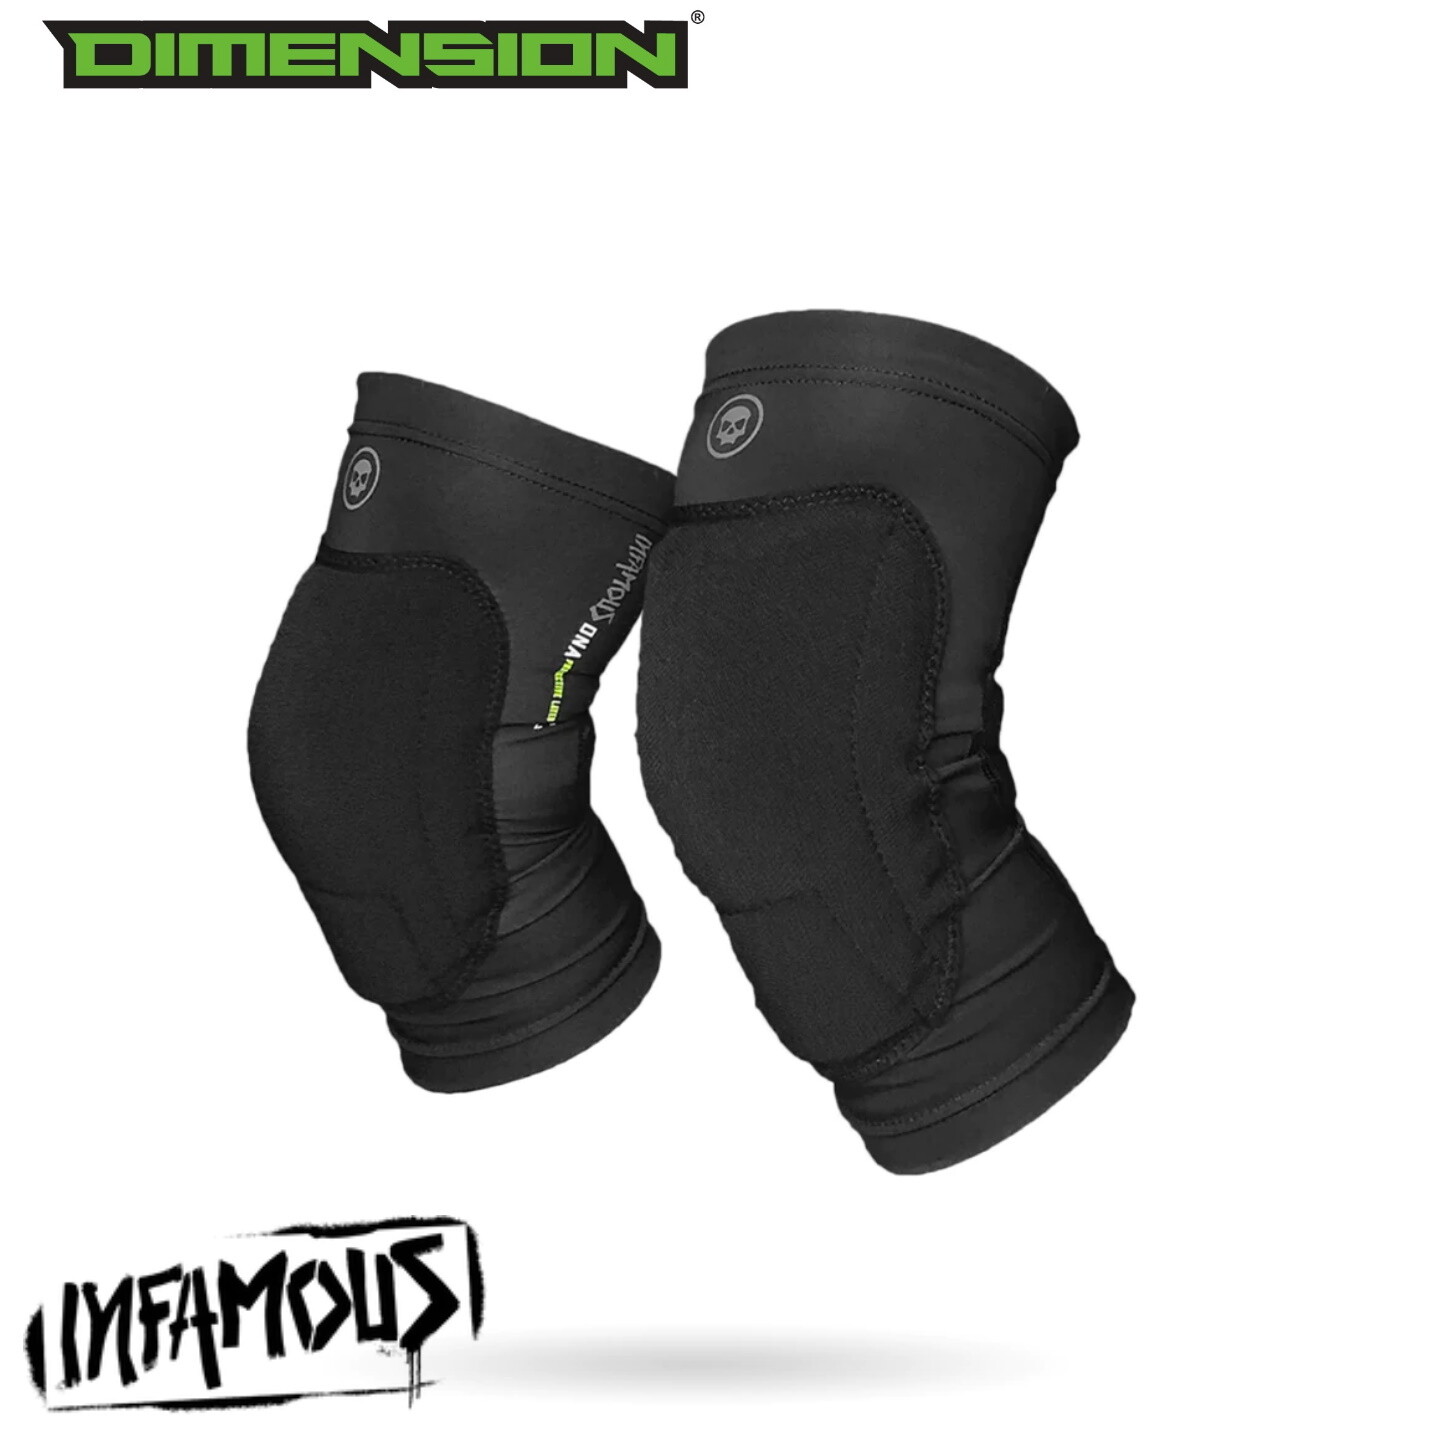 Infamous PRO DNA Knee Pads - Small